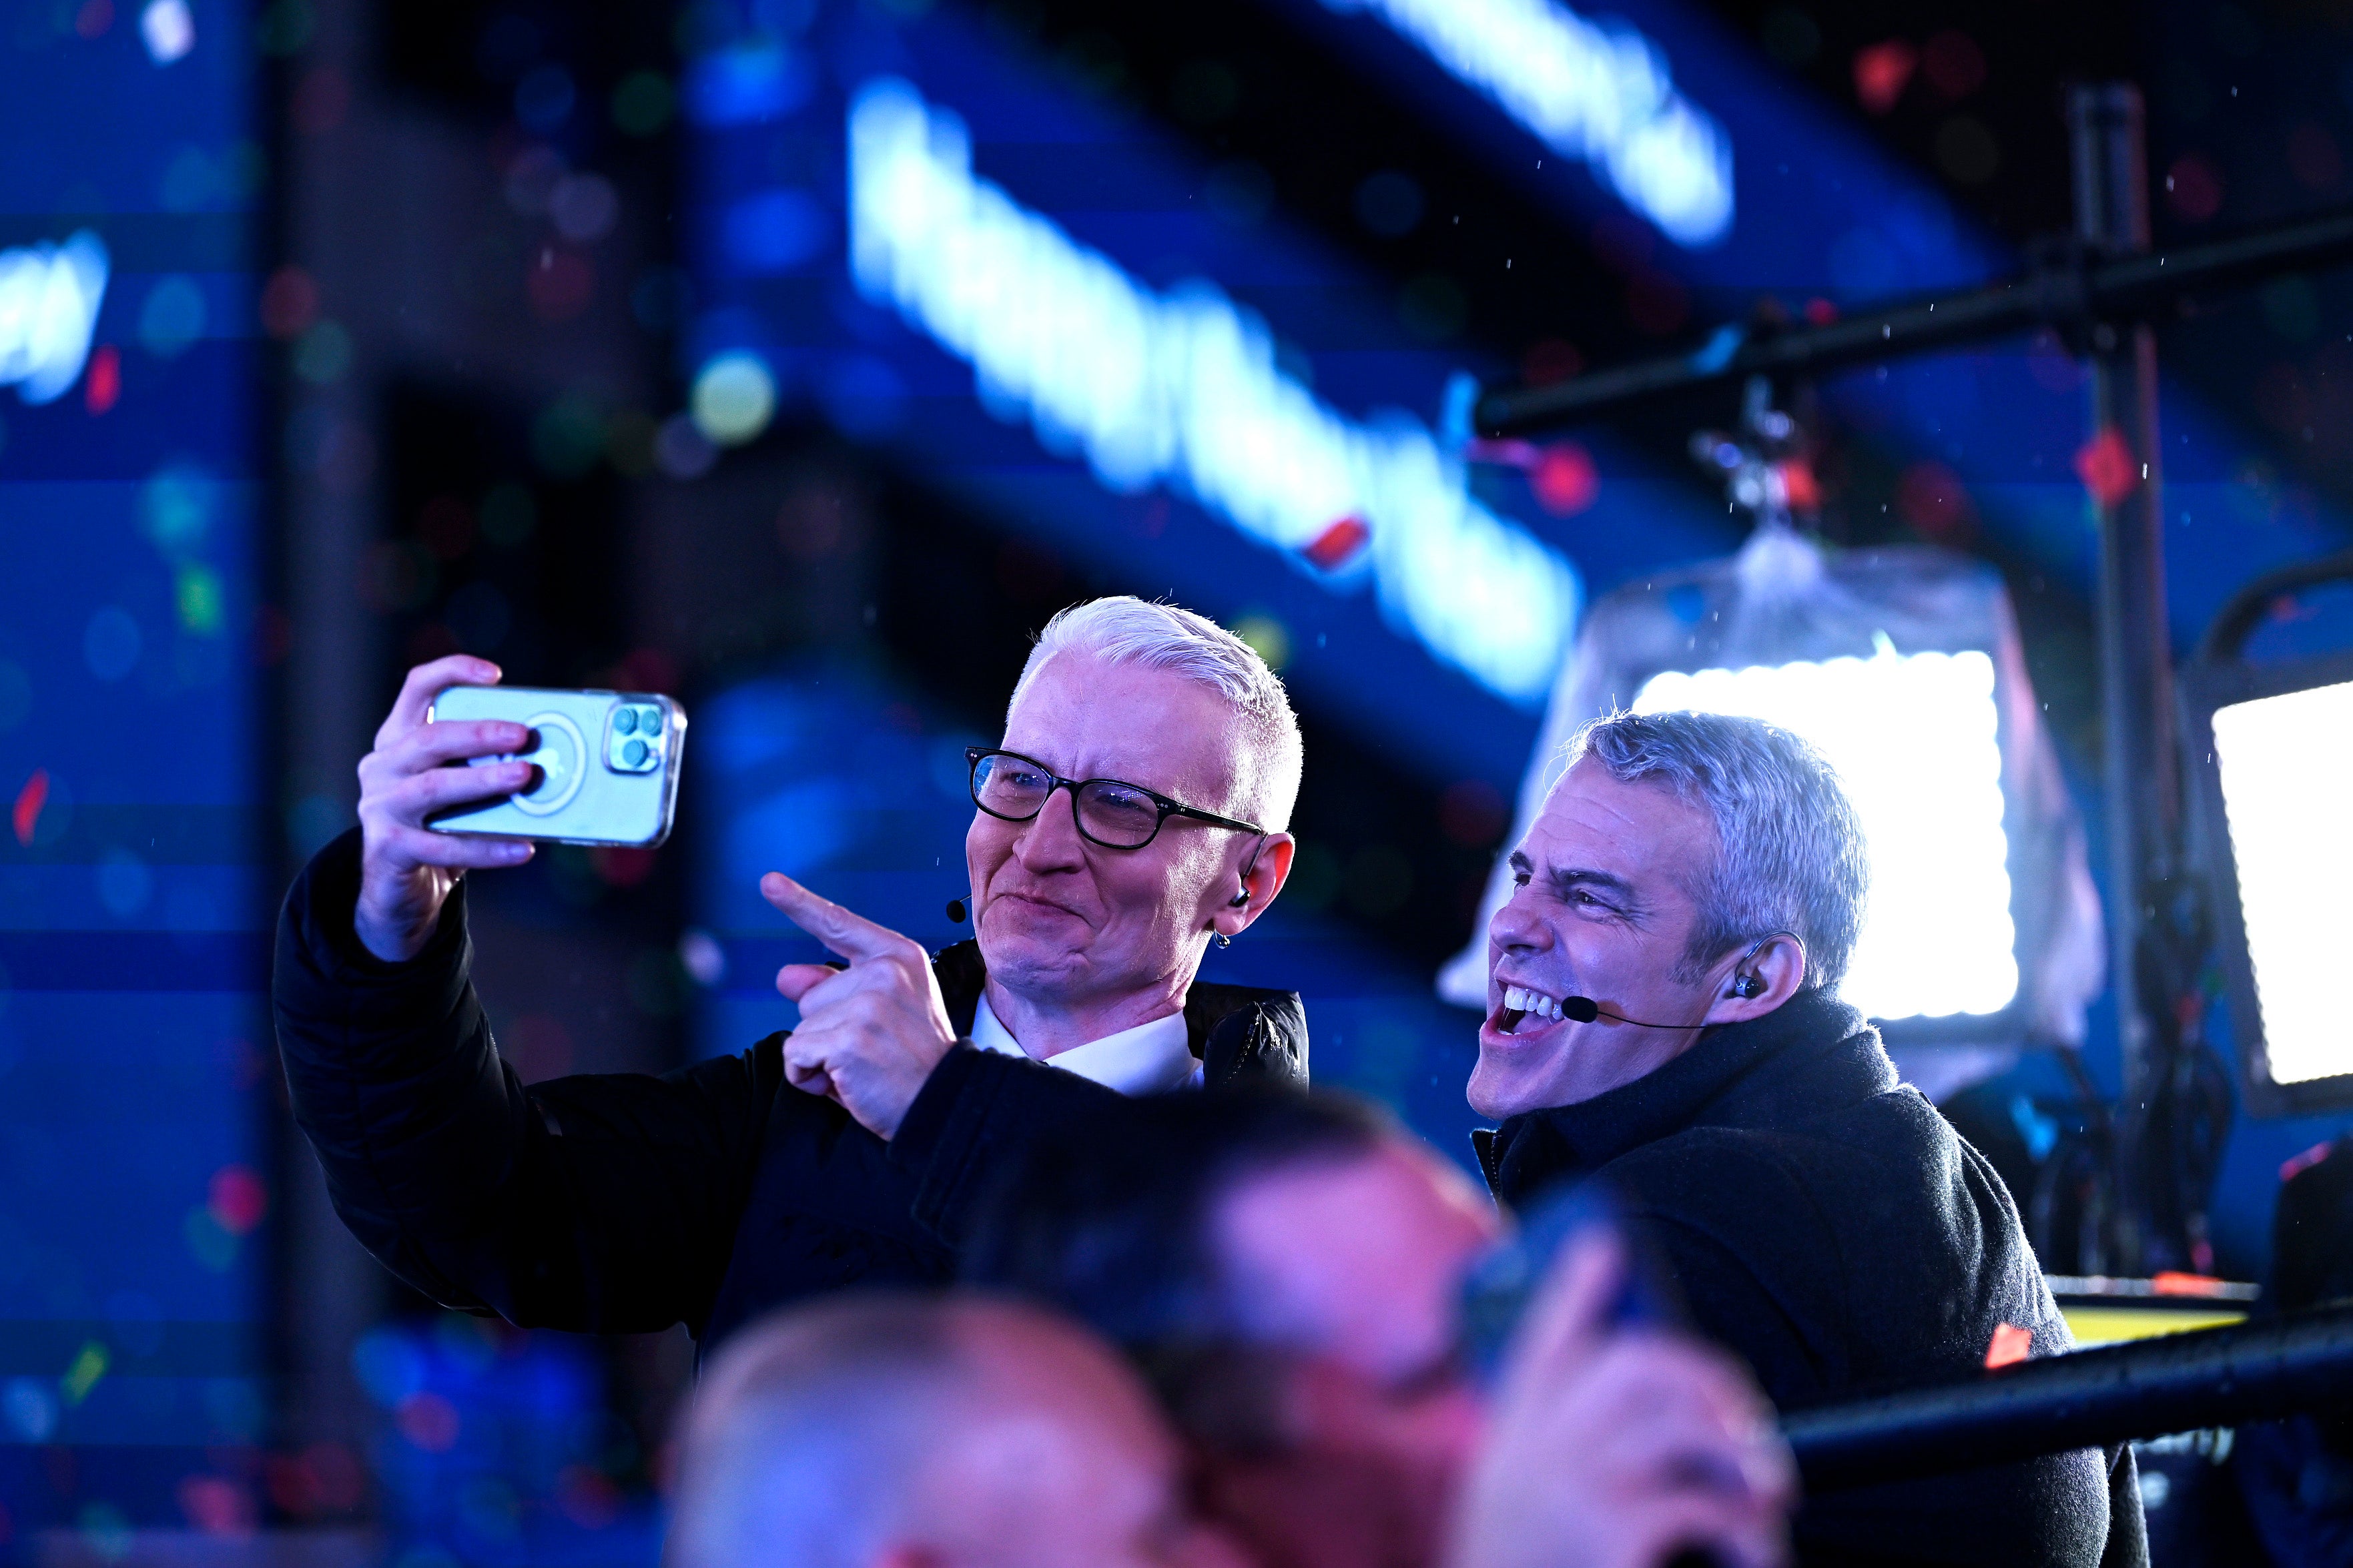 Anderson Cooper and Andy Cohen pose for a selfie during the Times Square New Year's Eve 2023 Celebration on December 31, 2022 in New York City.